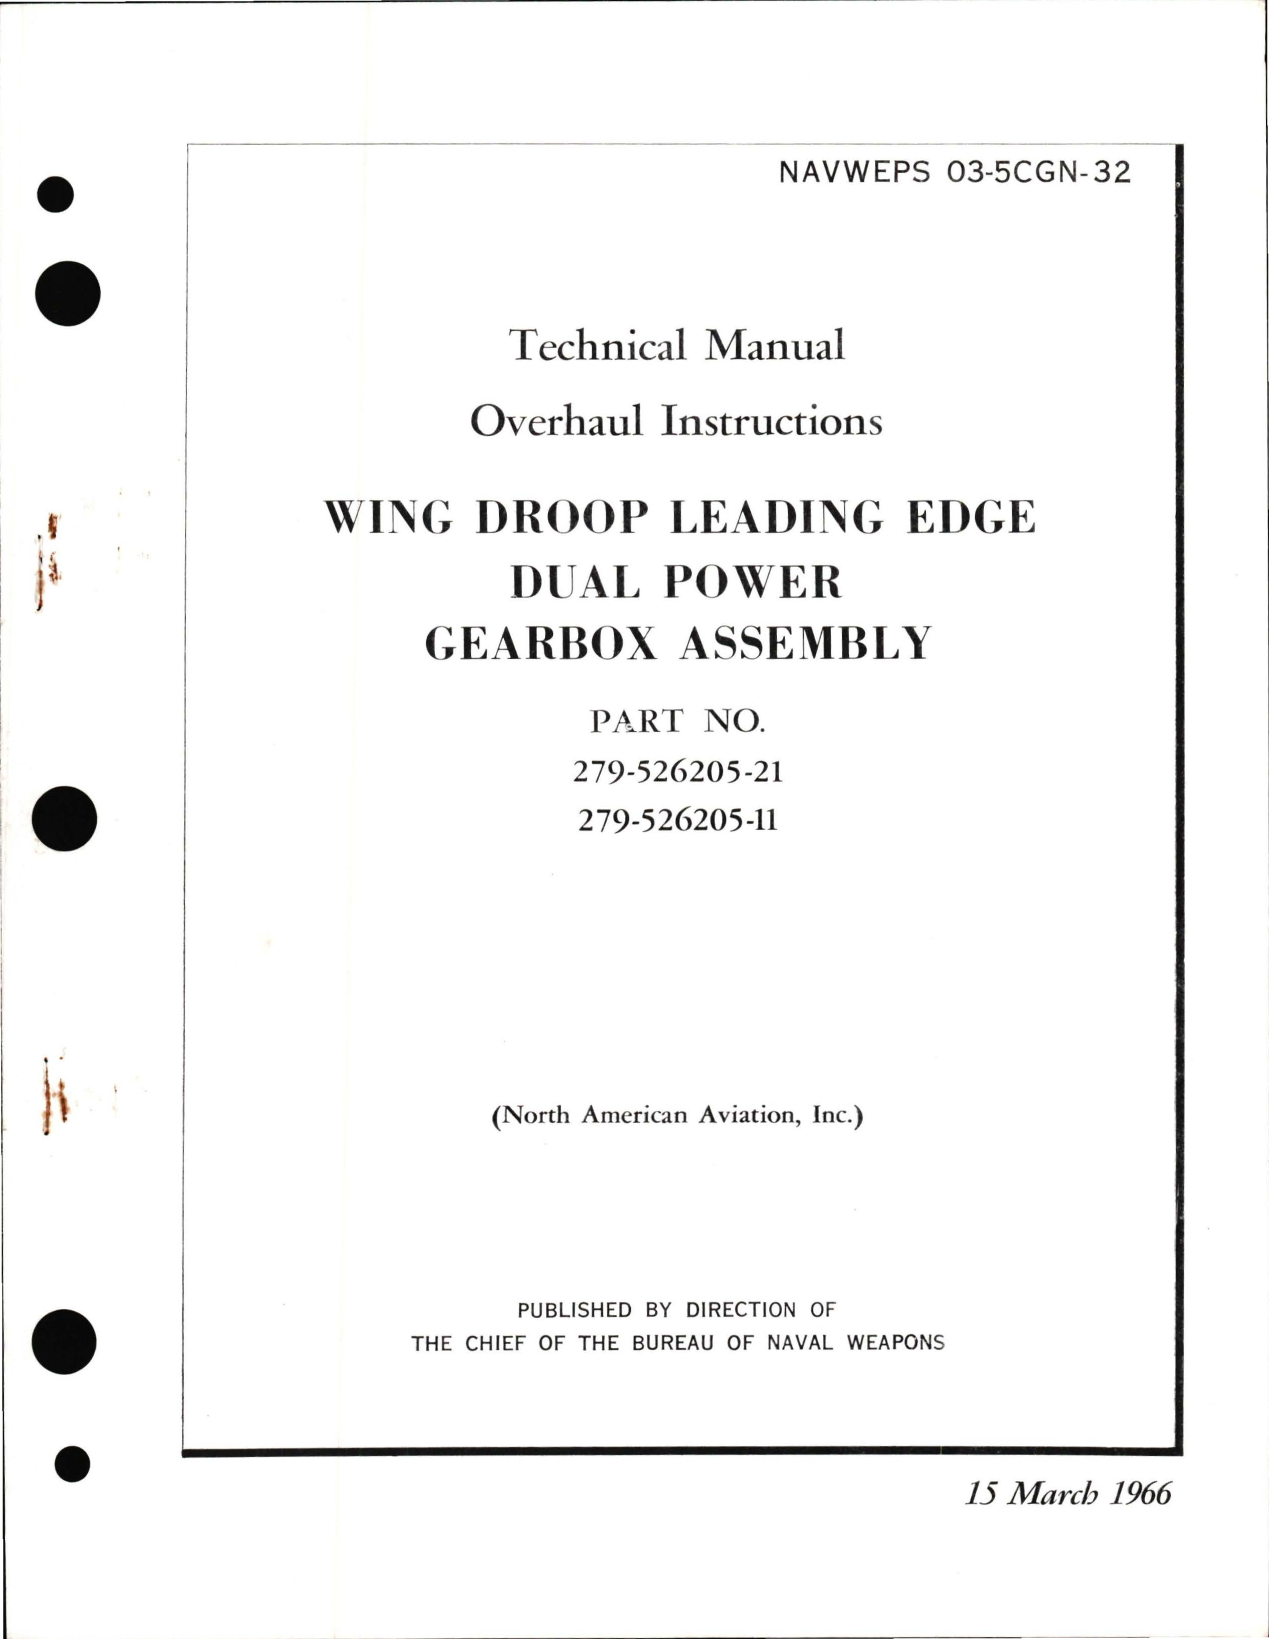 Sample page 1 from AirCorps Library document: Overhaul Instructions for Wing Droop Leading Edge, Dual Power Gearbox Assembly - Part 279-526205-21 and 279-526205-11 